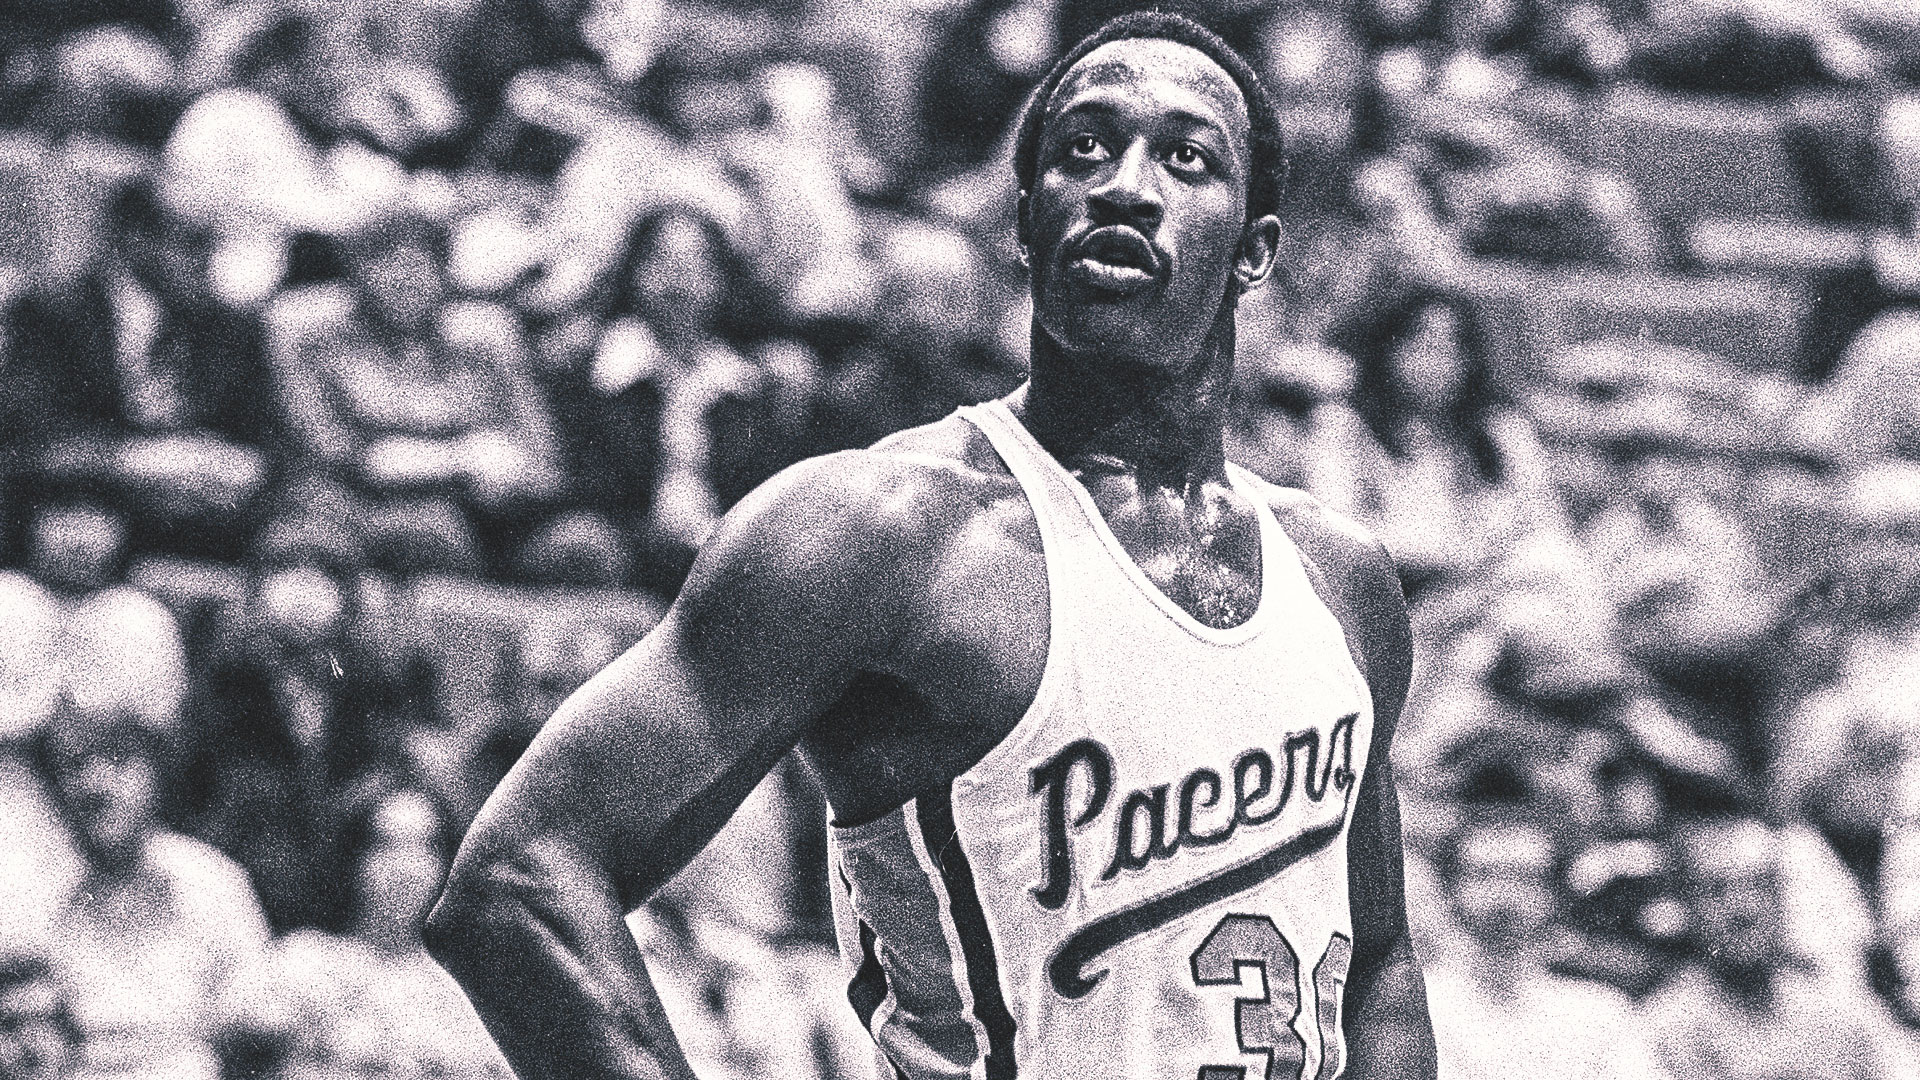 Hall of Famer, three-time NBA All-Star George McGinnis dies at 73